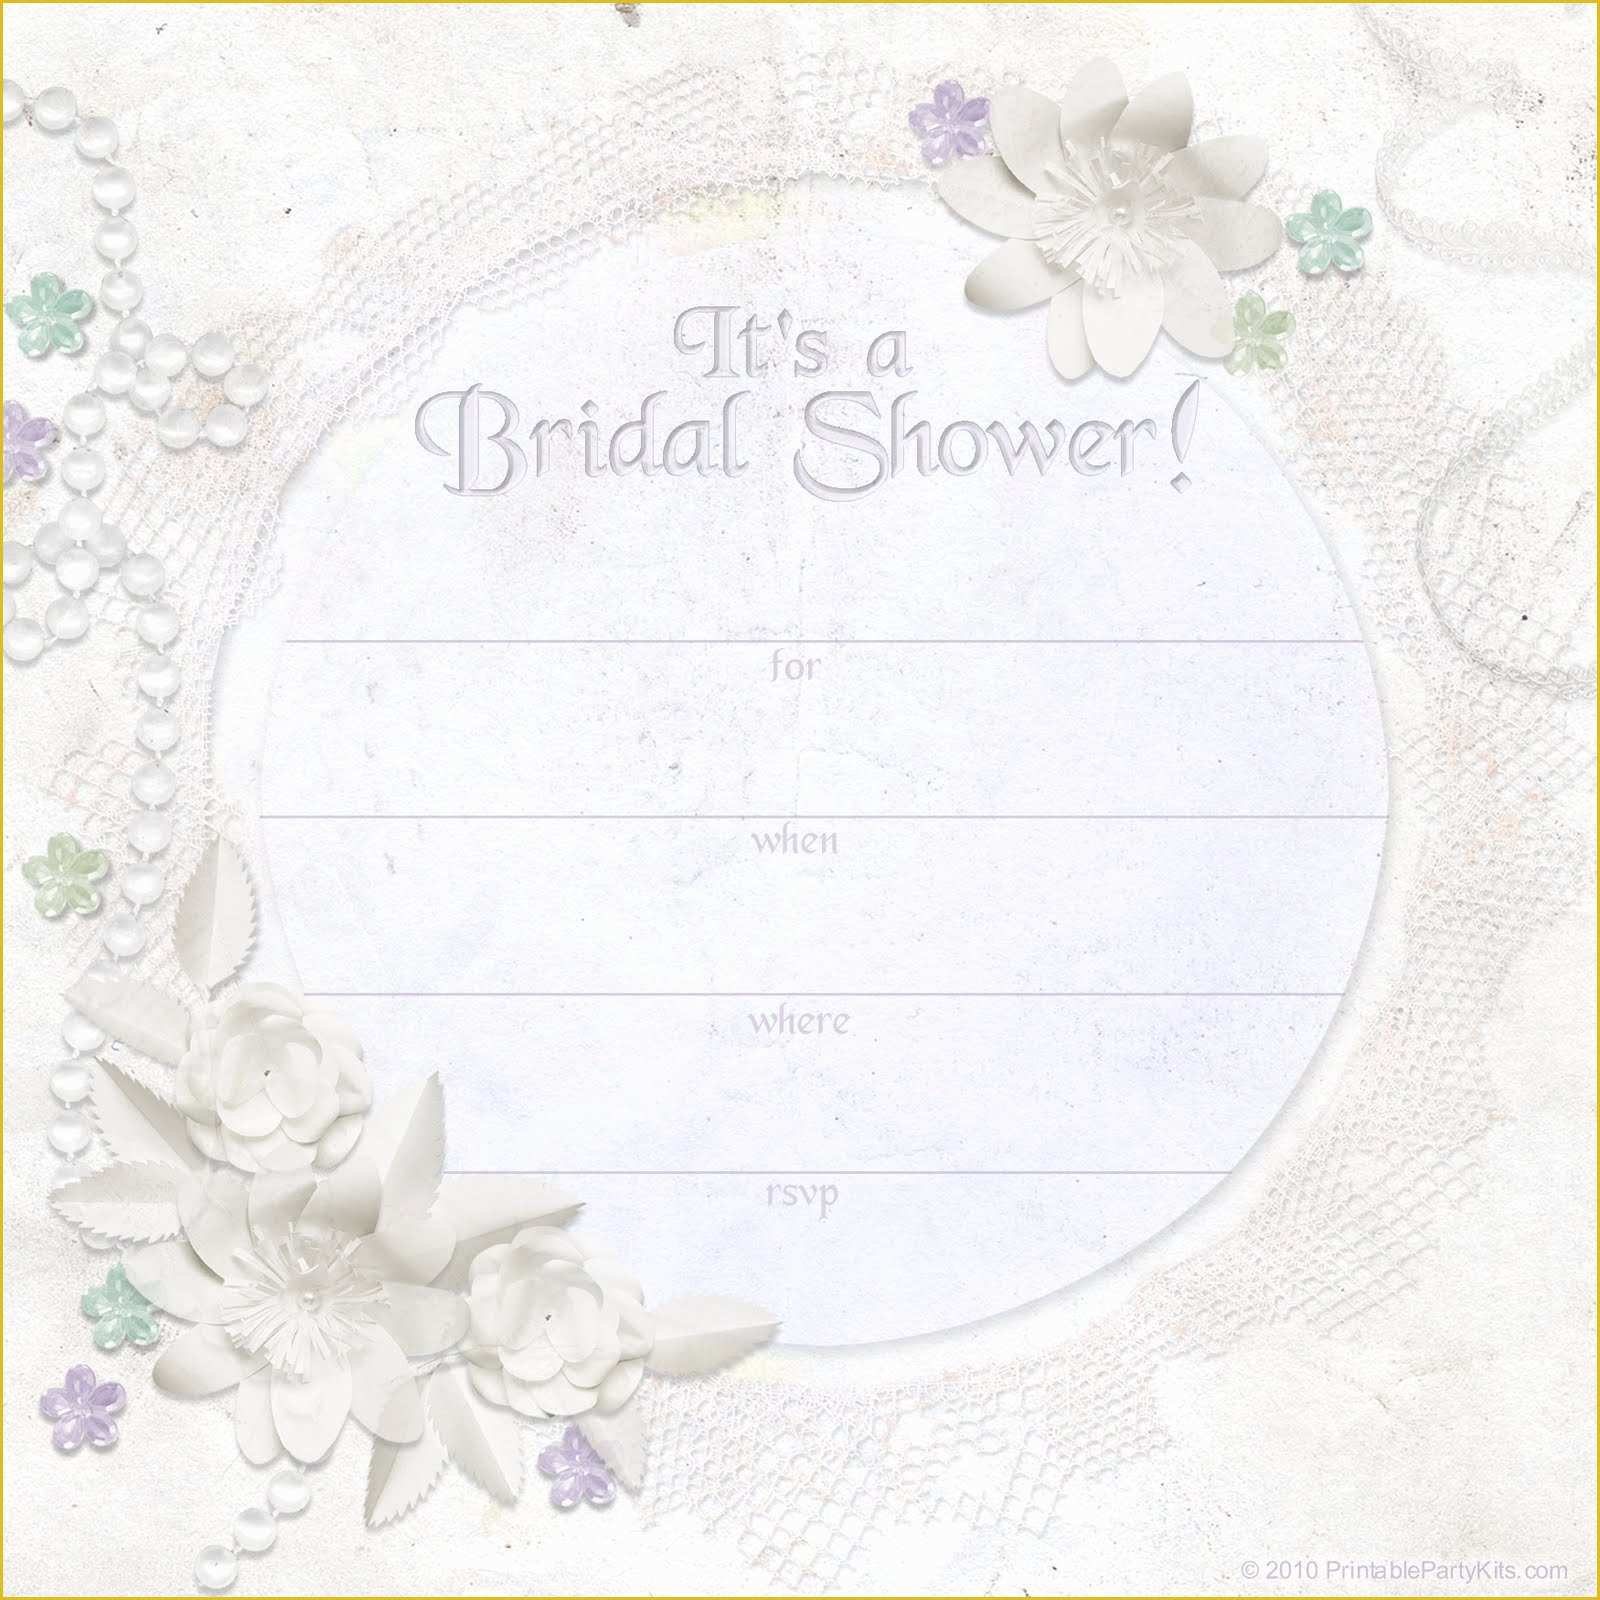 Free Bridal Shower Invitation Templates Downloads Of Free Printable Party Invitations Ivory Dreams Bridal